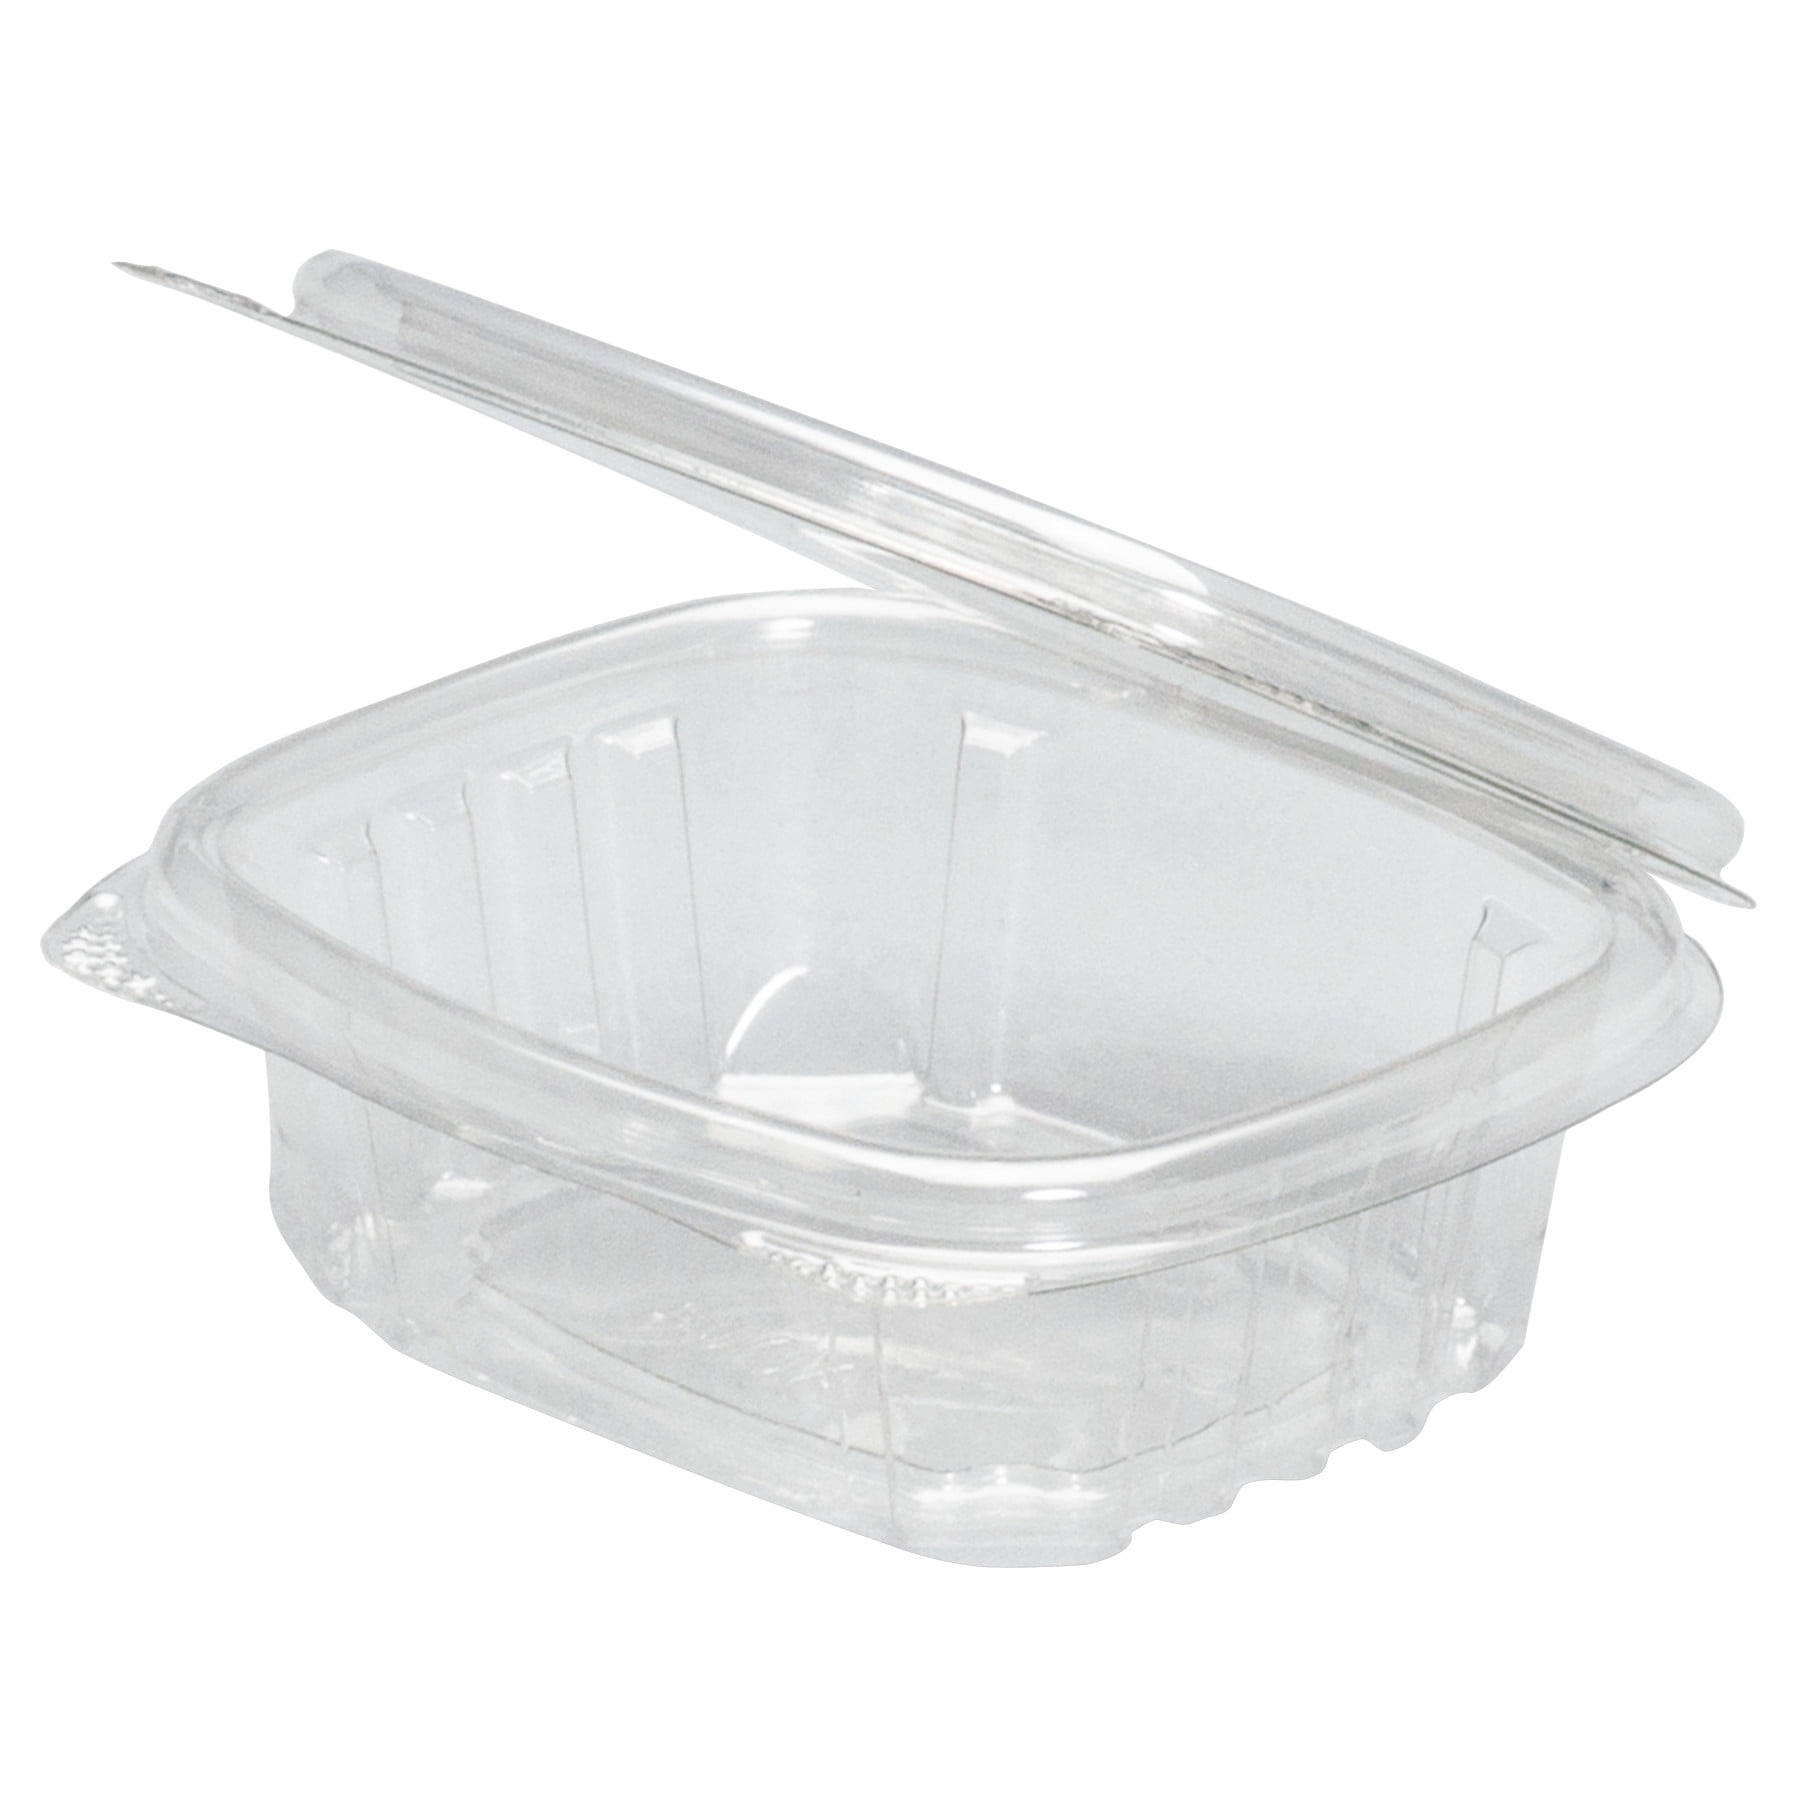 8oz Clear Hinged Deli Cake Container with High Dome Lid 100ct BPA free 